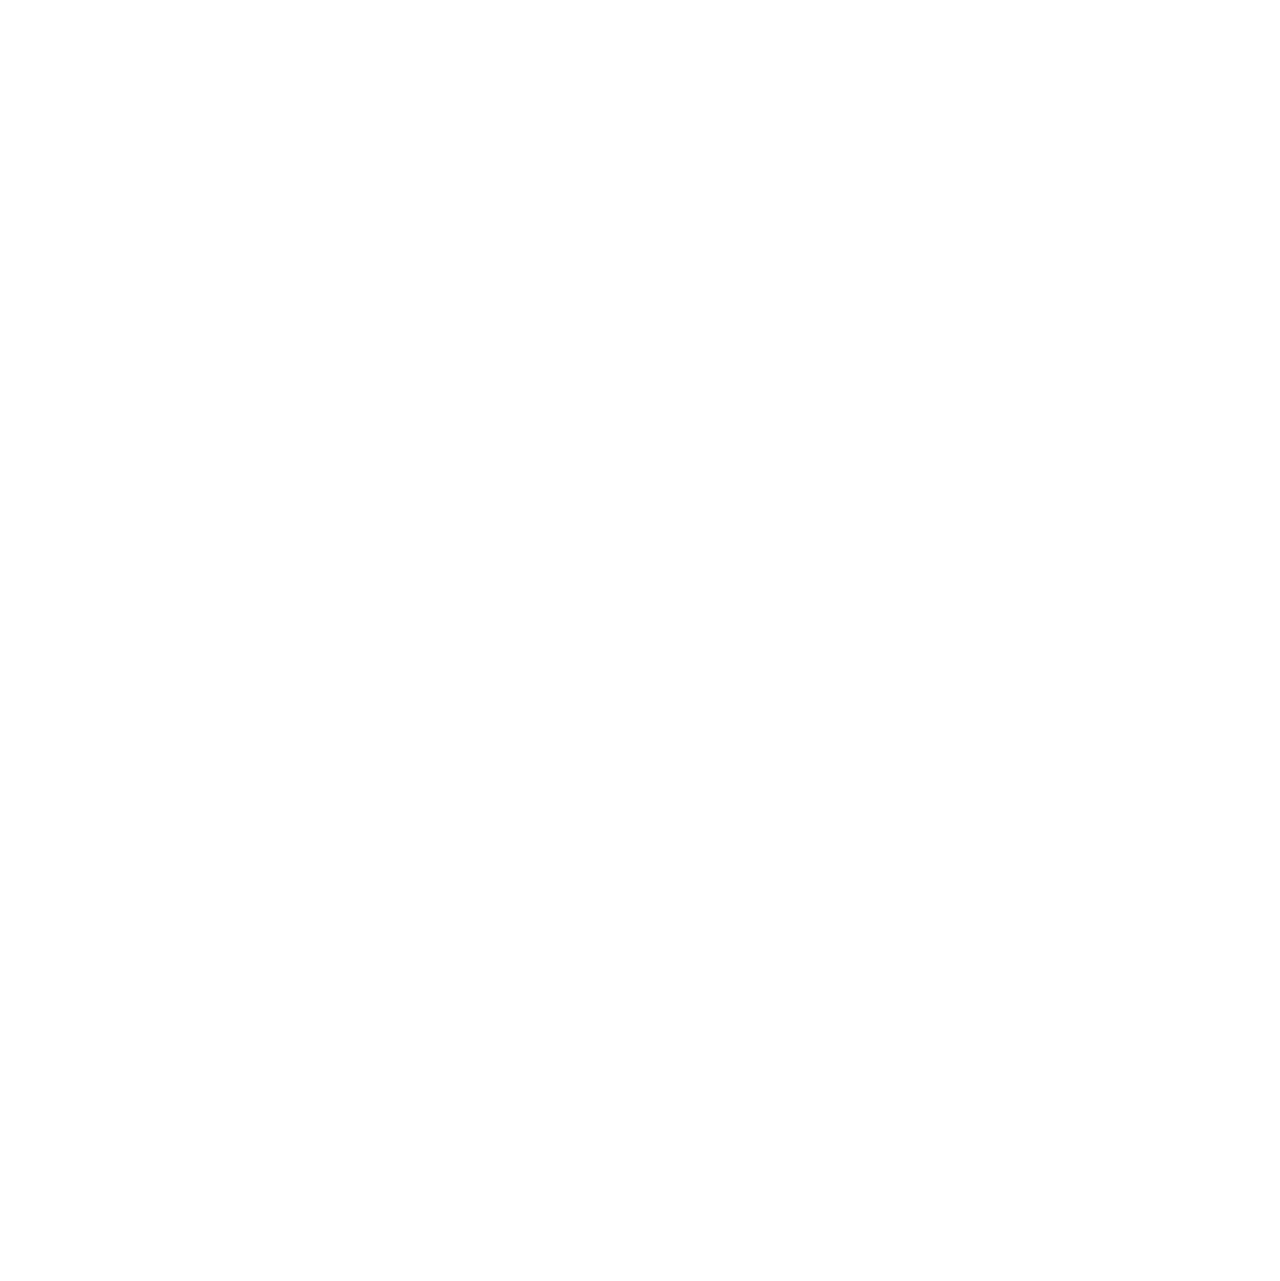 cooperative   safety   services   's logo